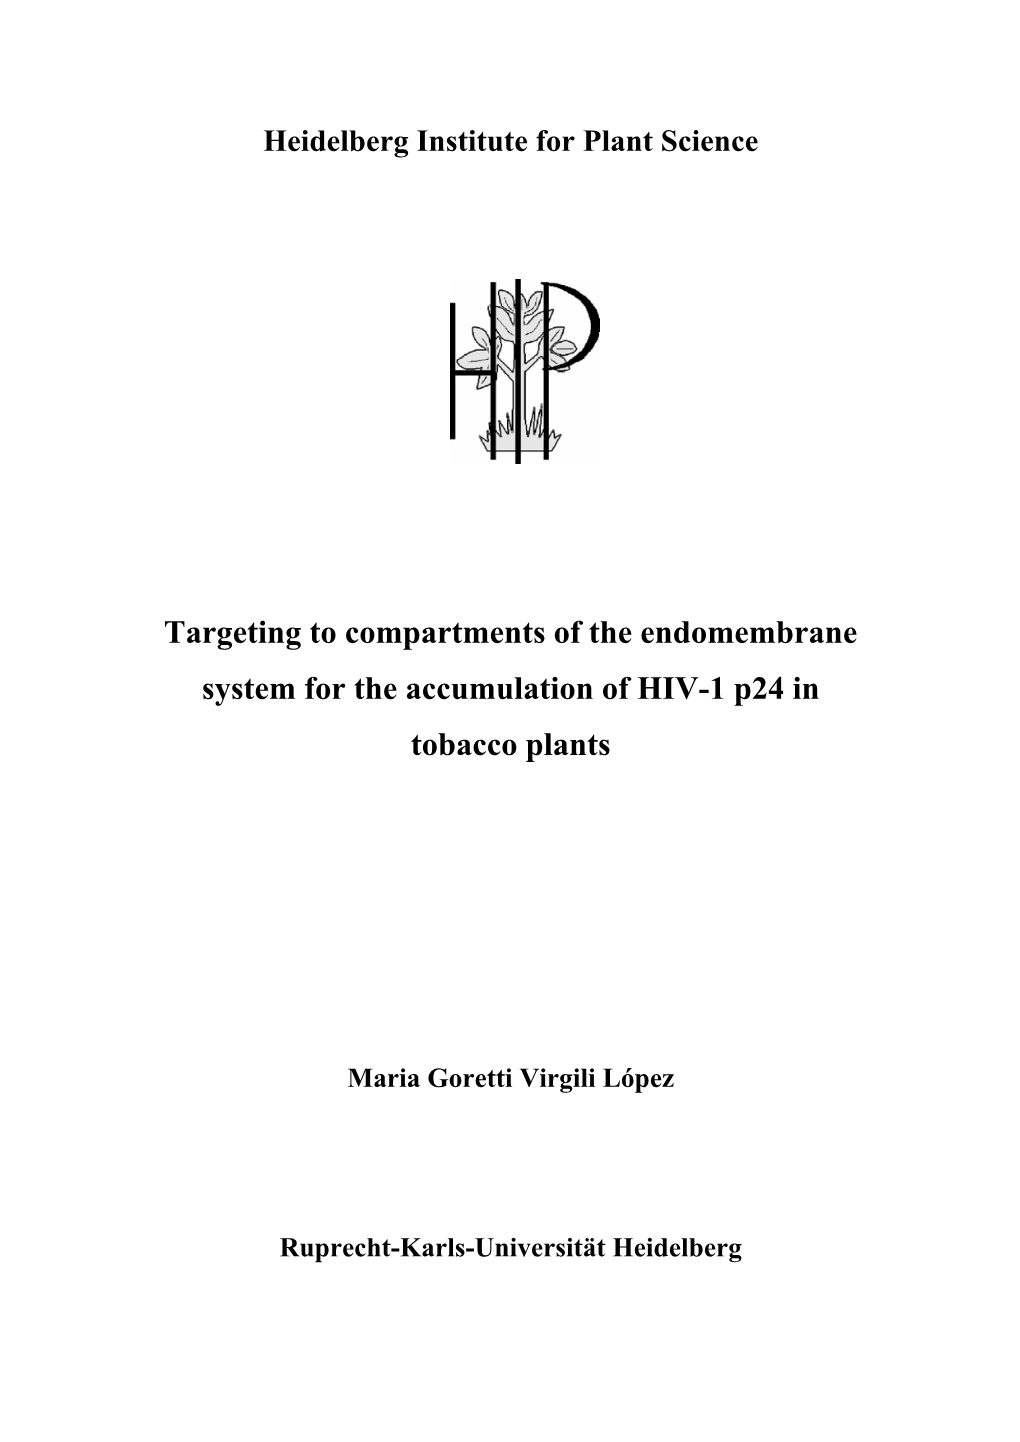 Expression and Characterisation of Hiv-1